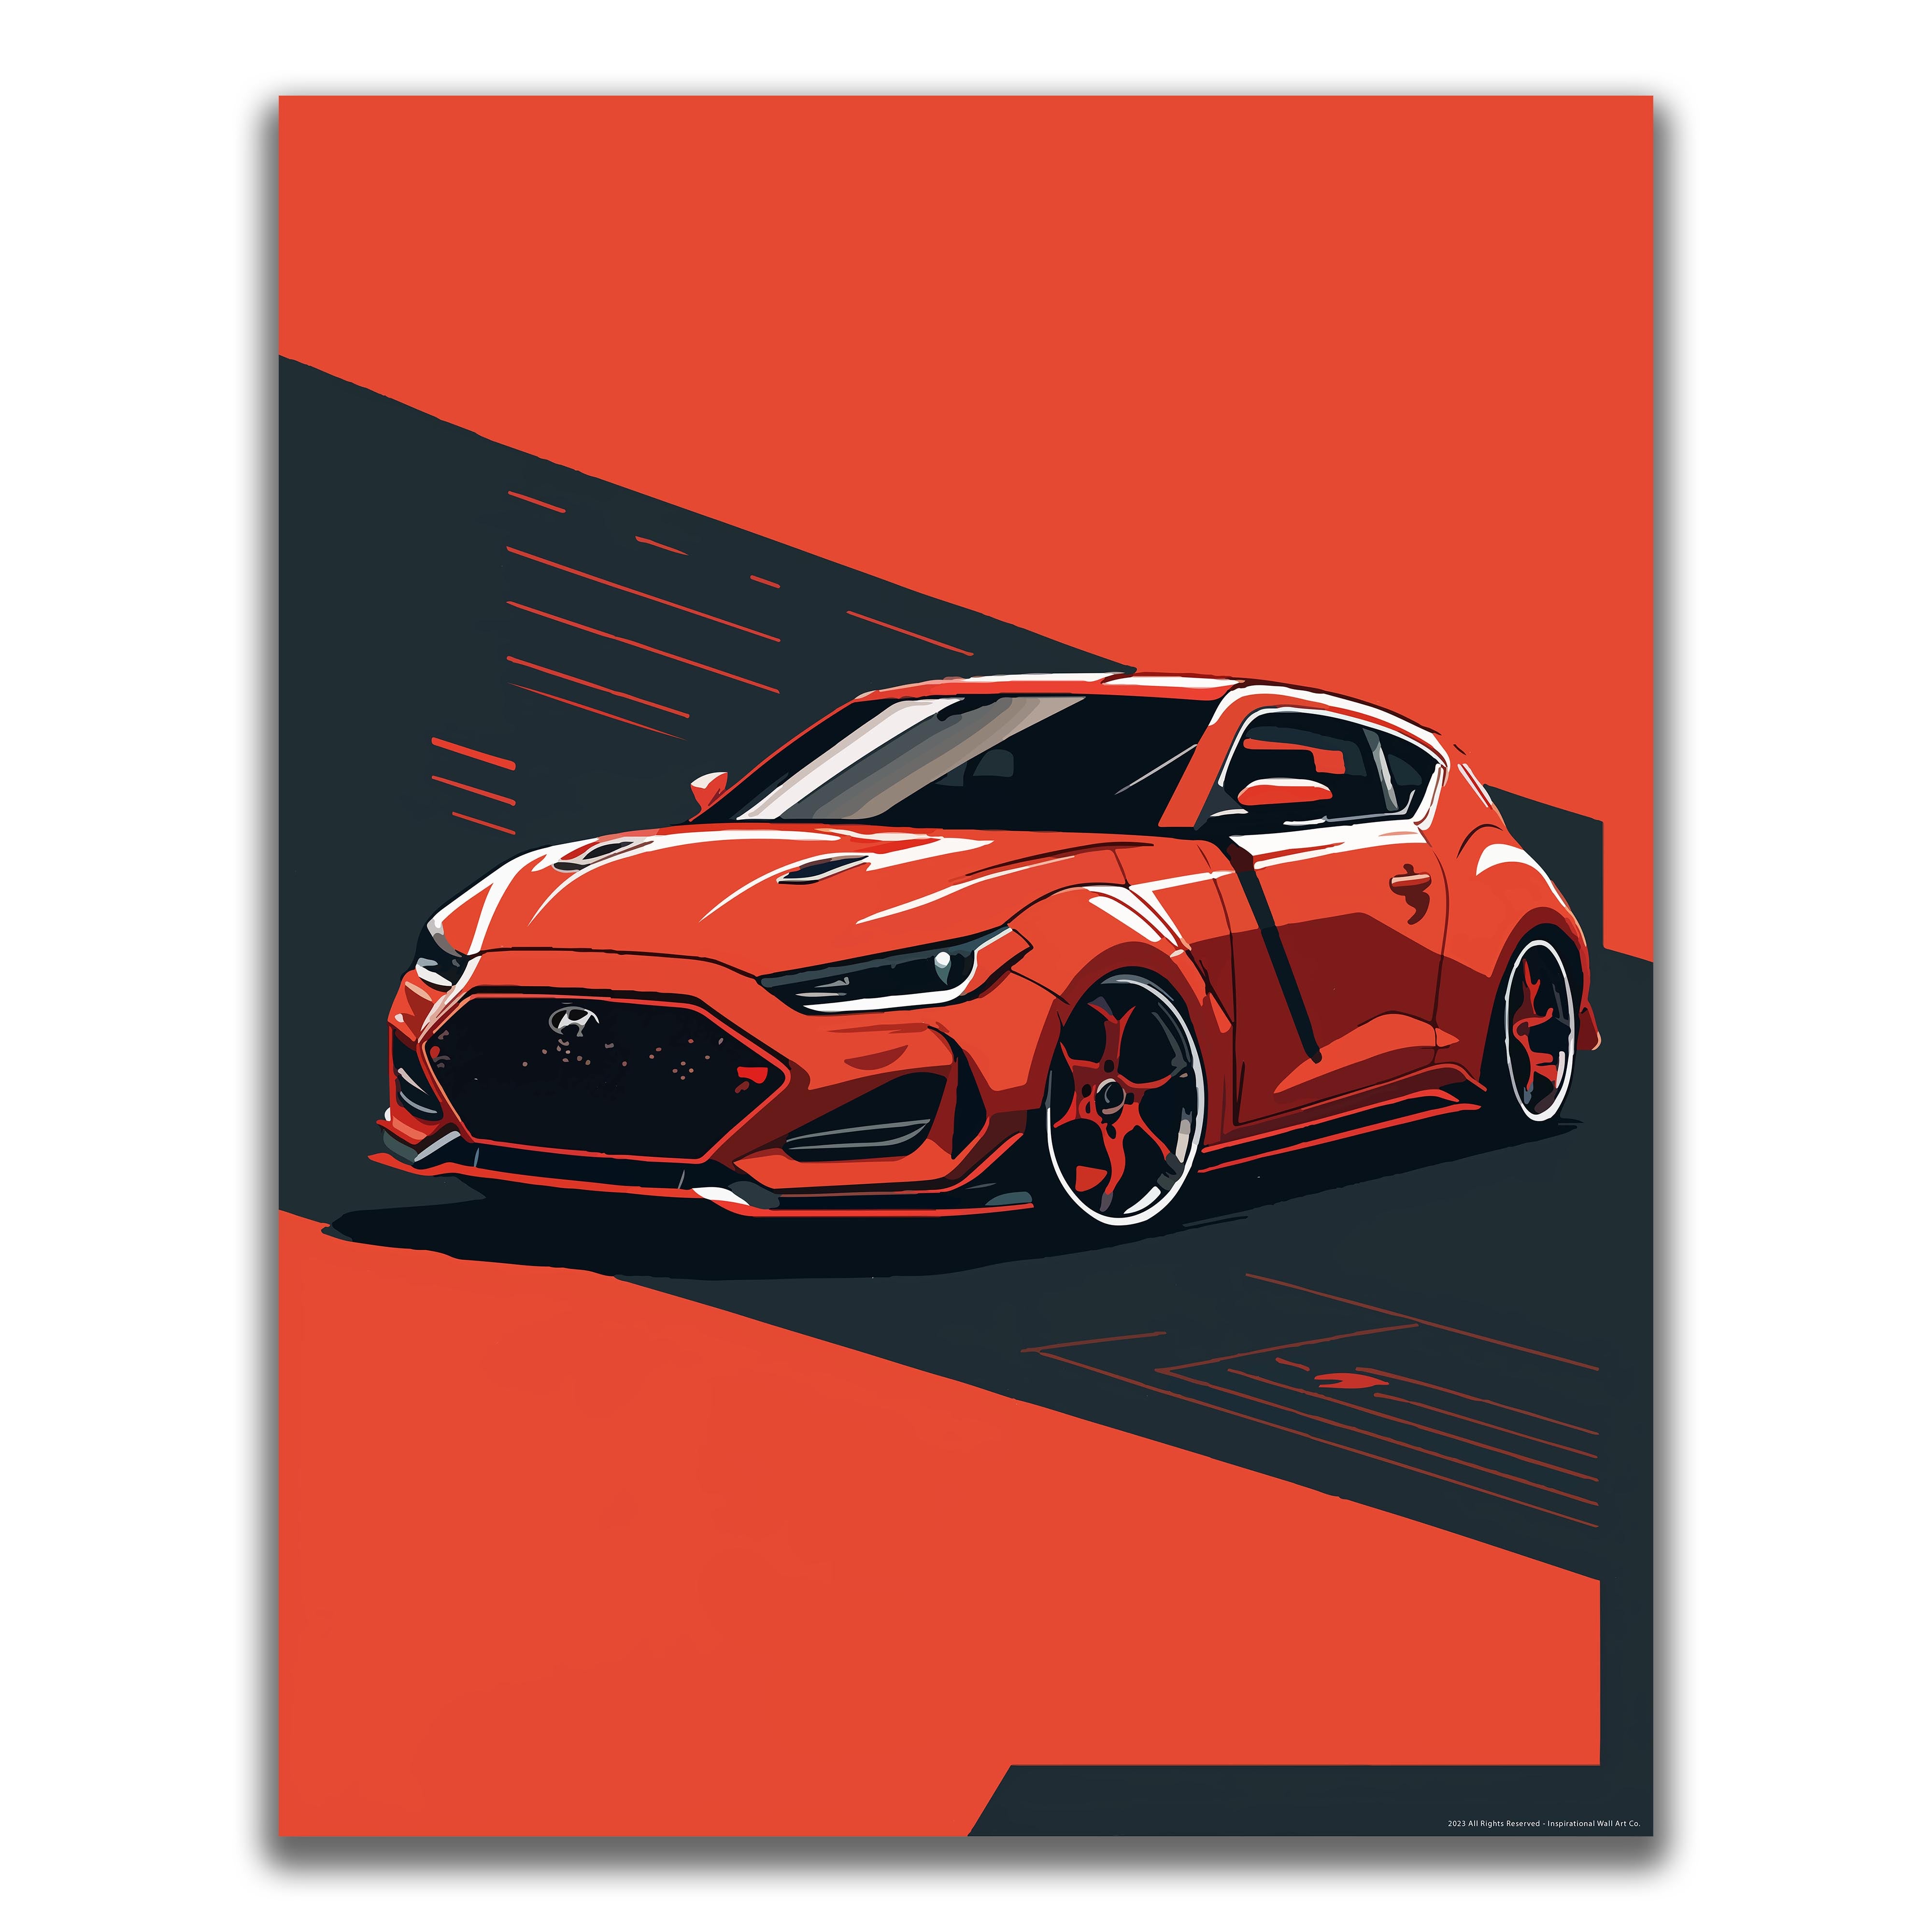 Red Veloster - Car Poster